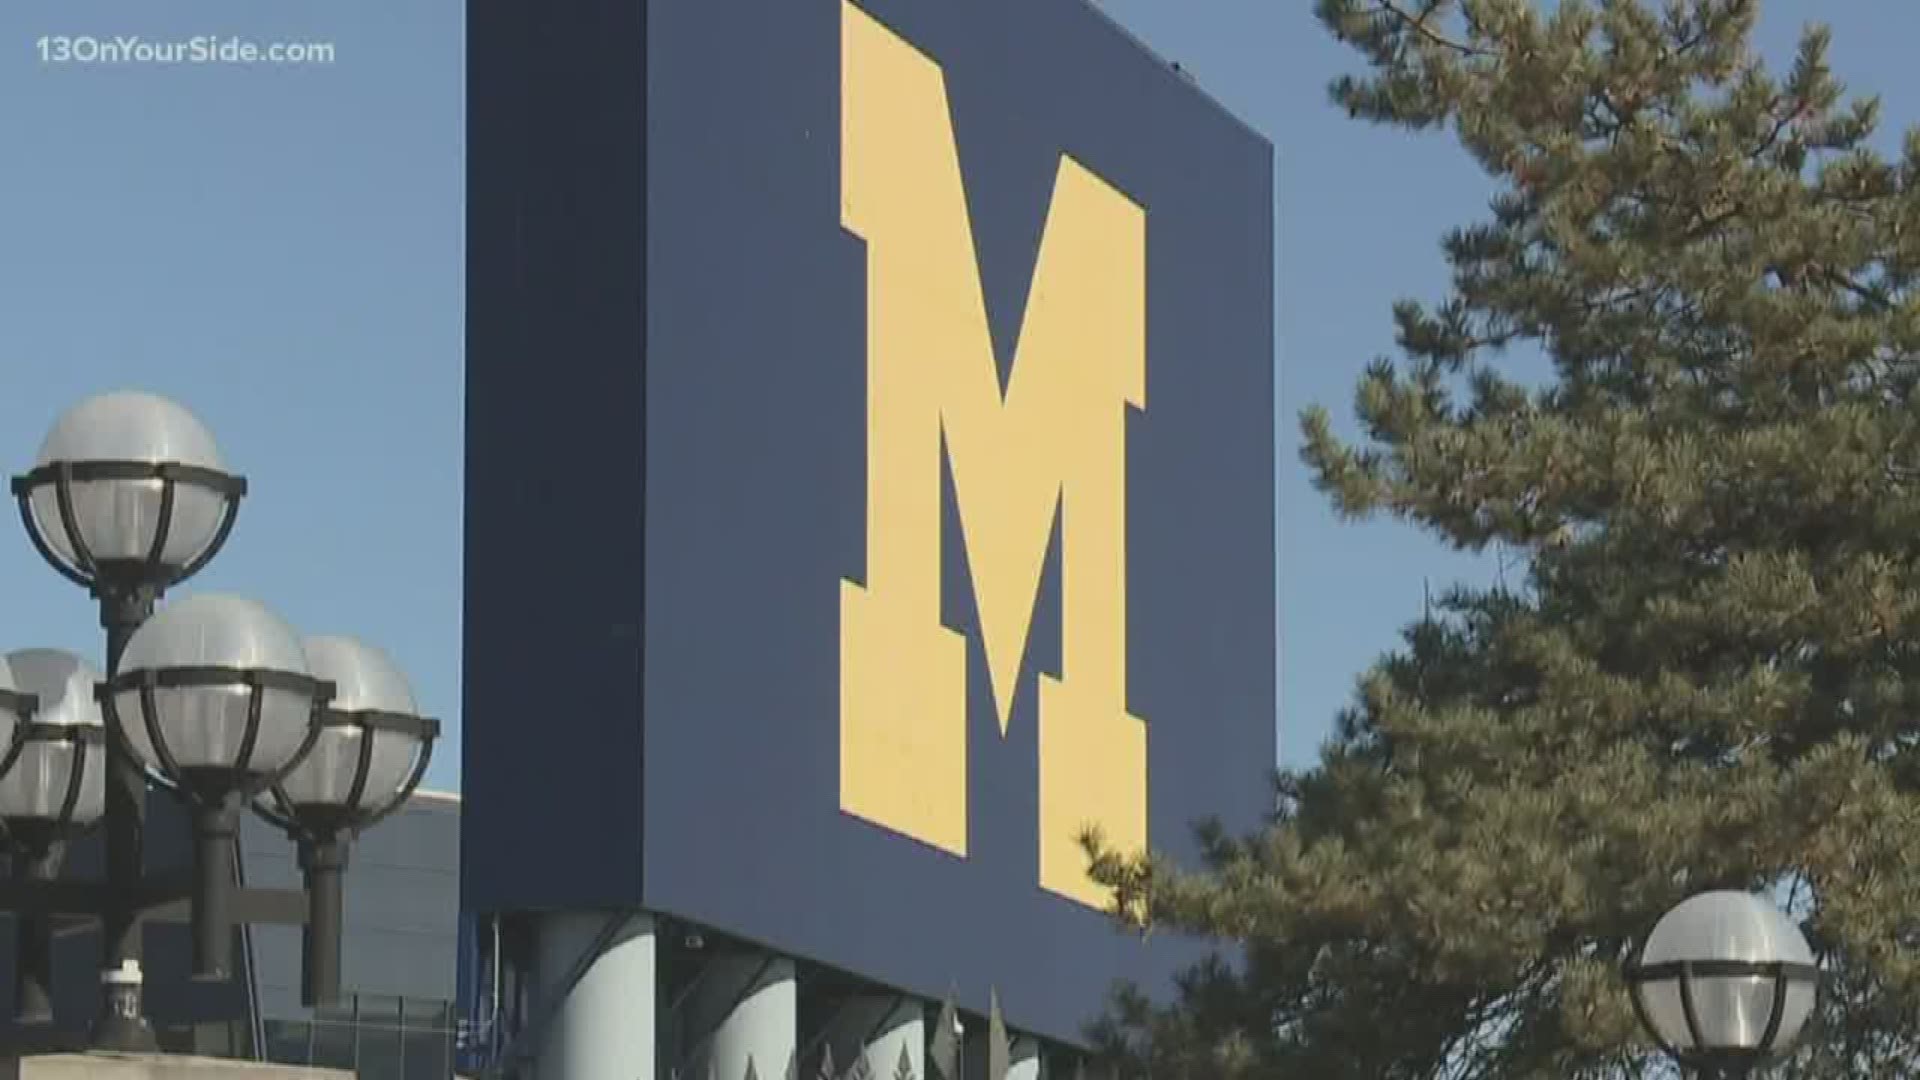 The football game against Maryland is canceled and will not be rescheduled as Michigan pauses practice until Monday.